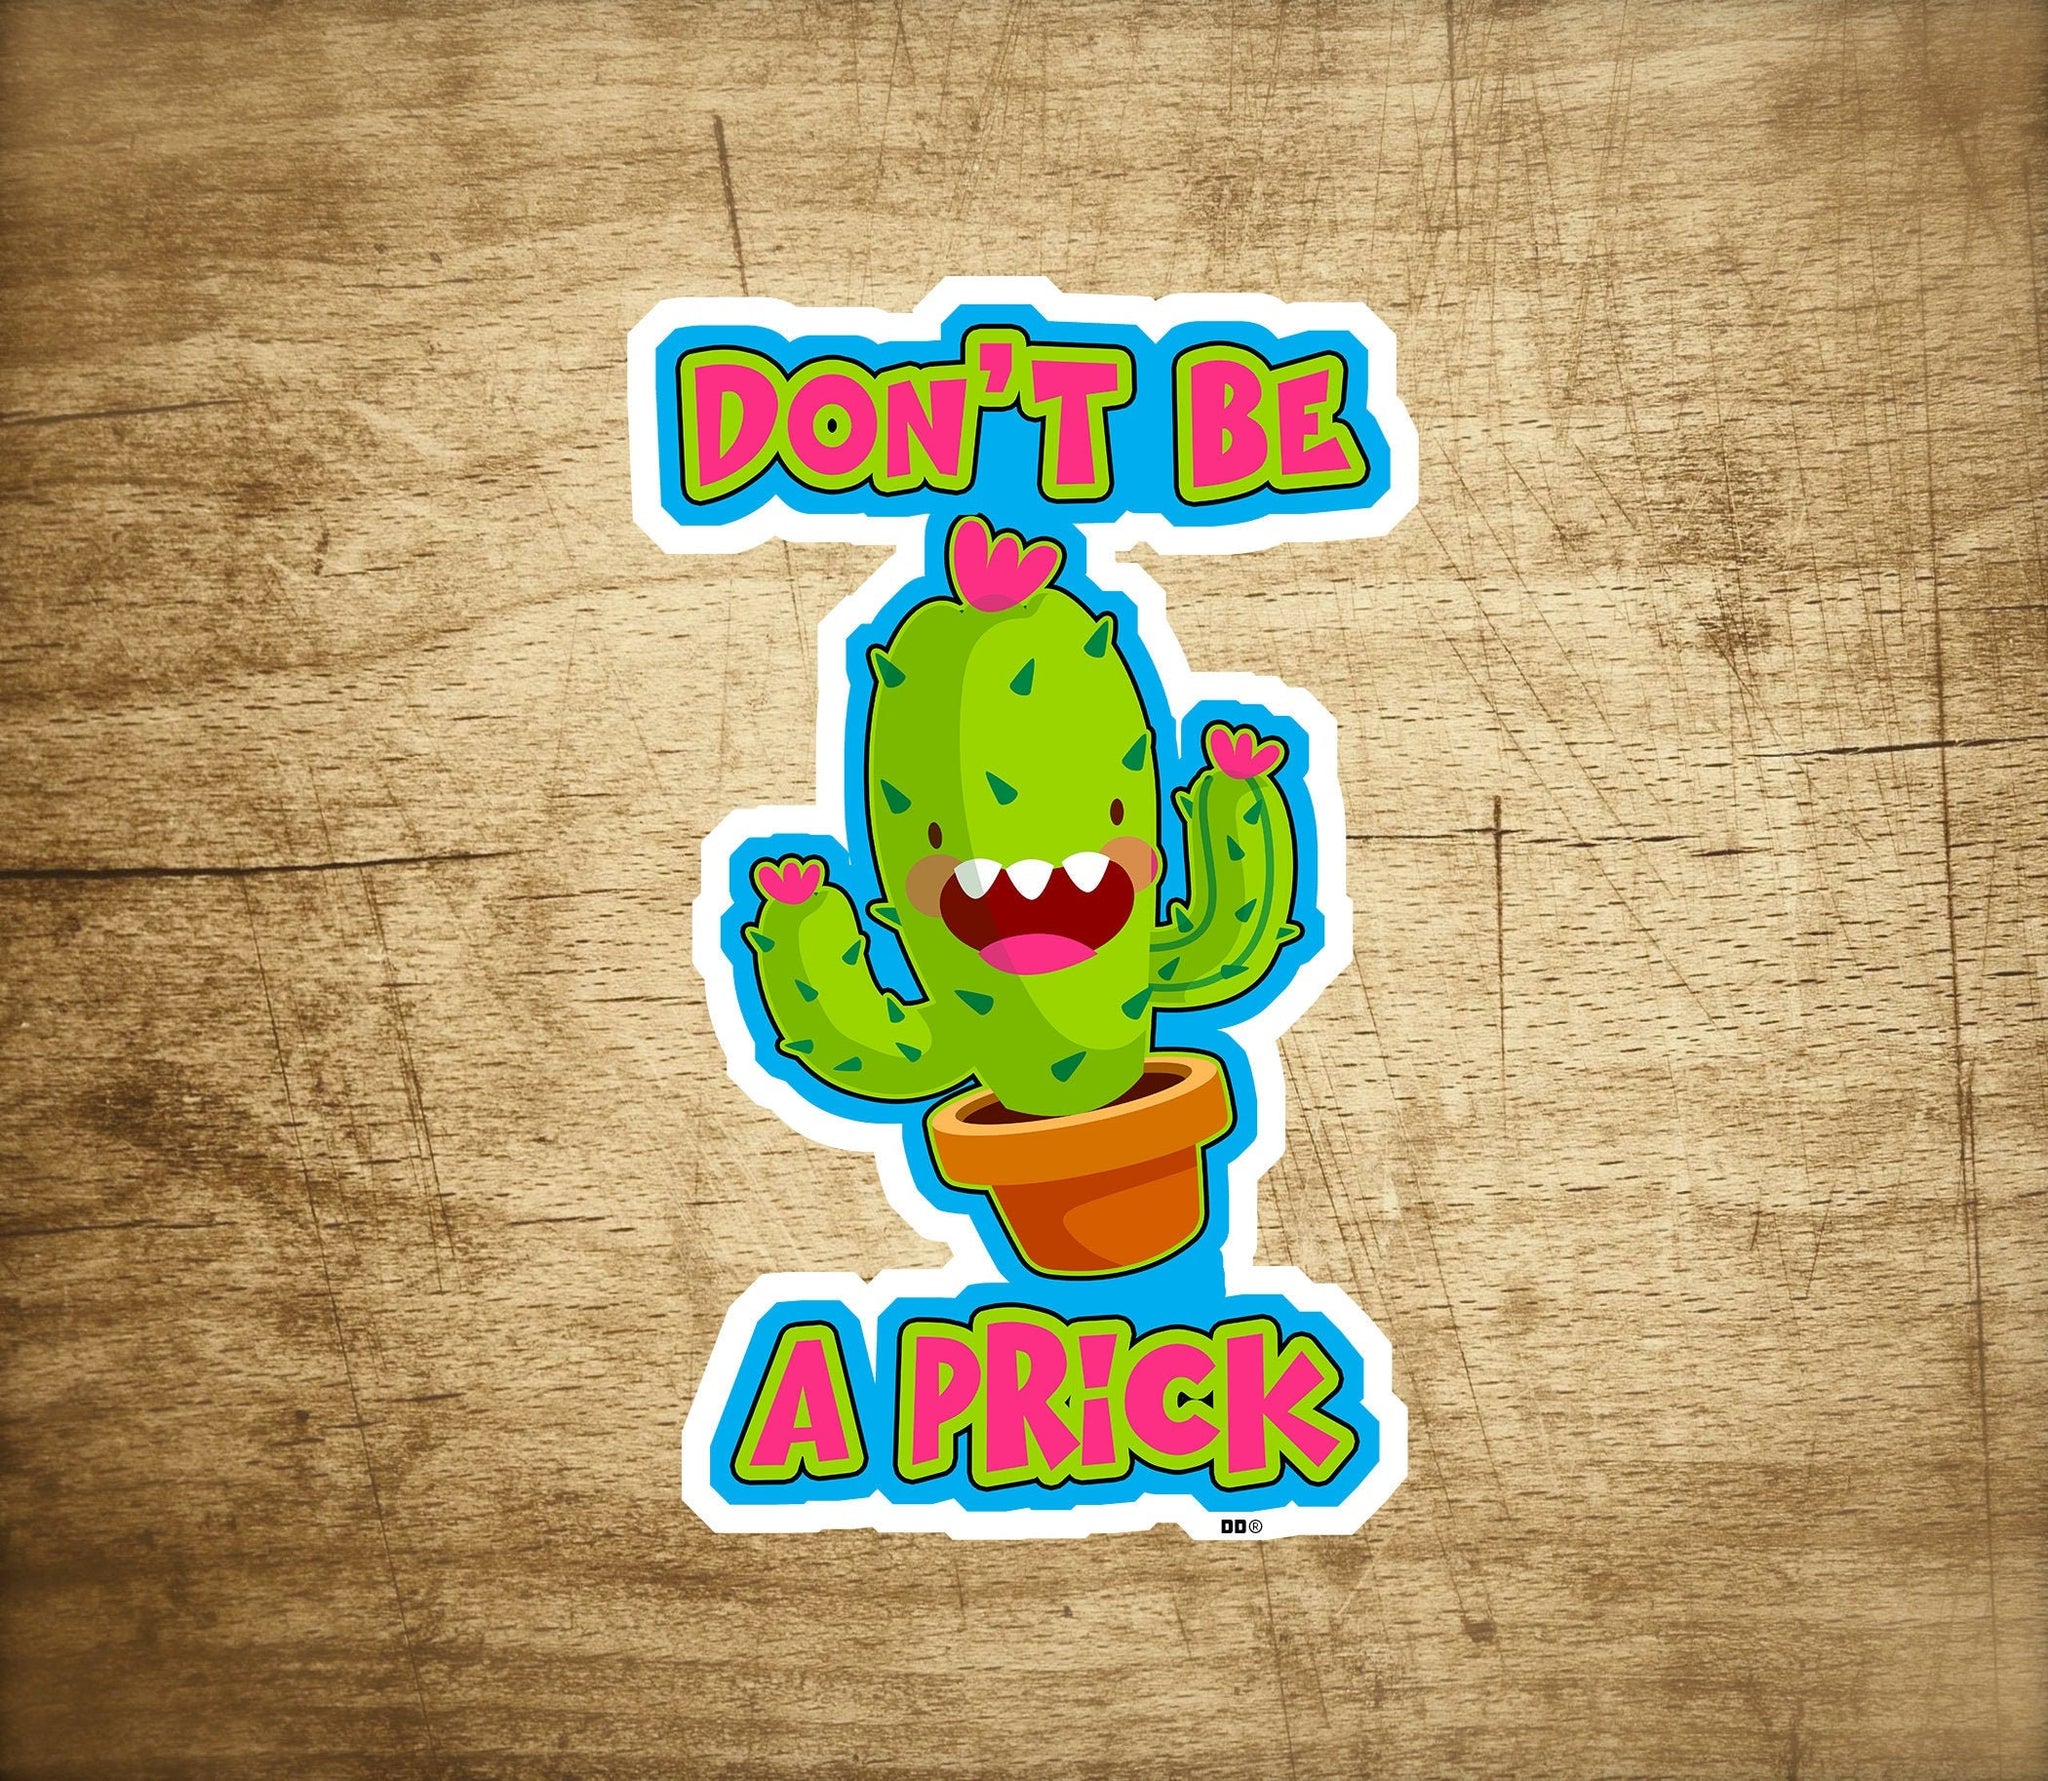 Don't Be a Prick Sticker Decal Funny 3.75" x 2.5" Vinyl Cactus